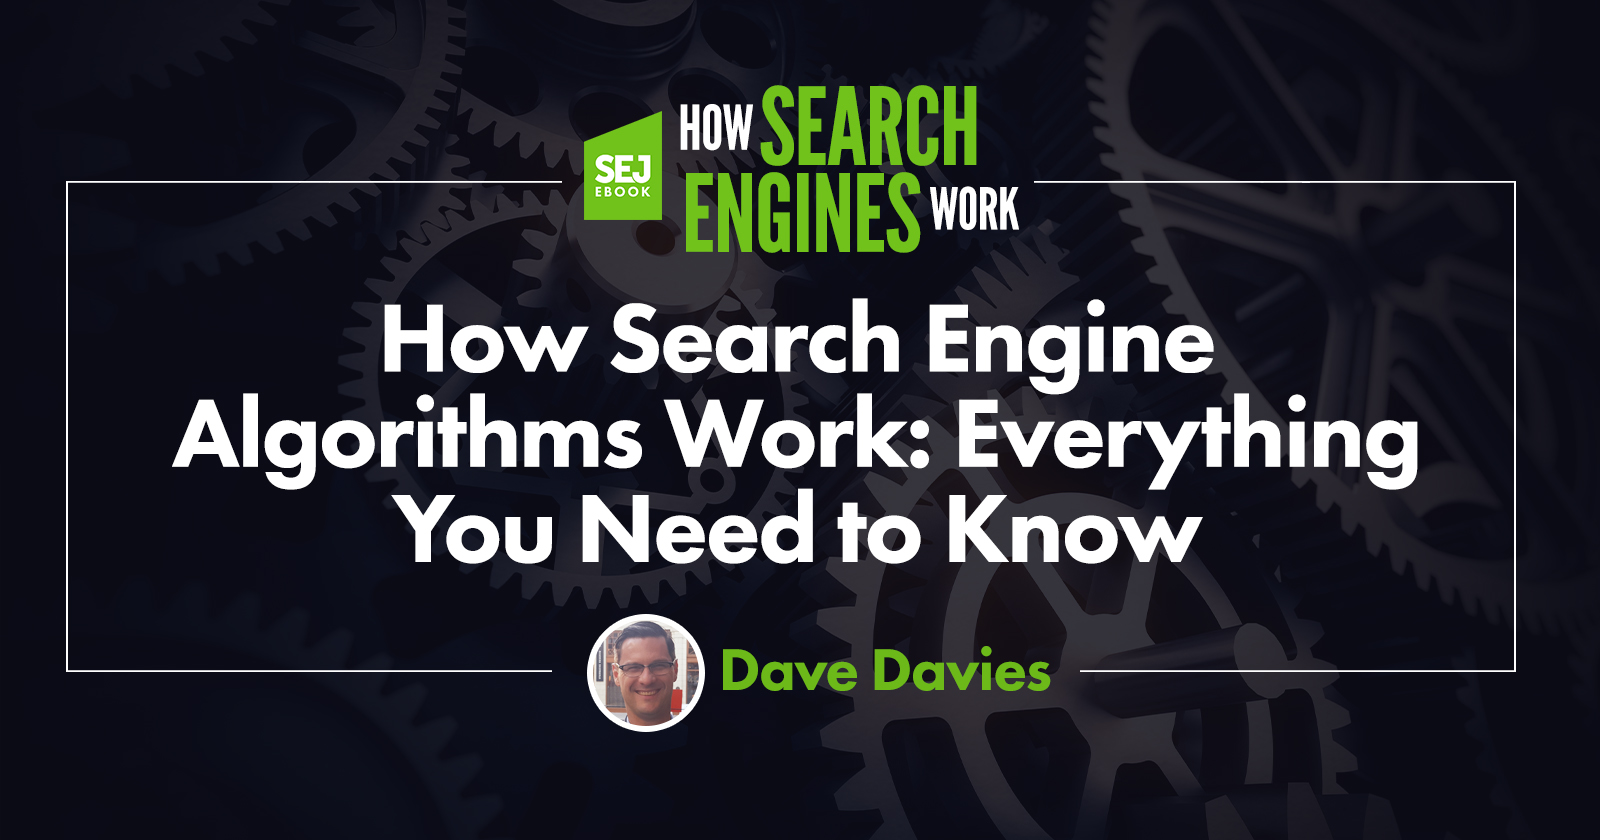 how-search-engine-algorithms-work-everything-you-need-to-know-5eb1973f36bbd.jpg